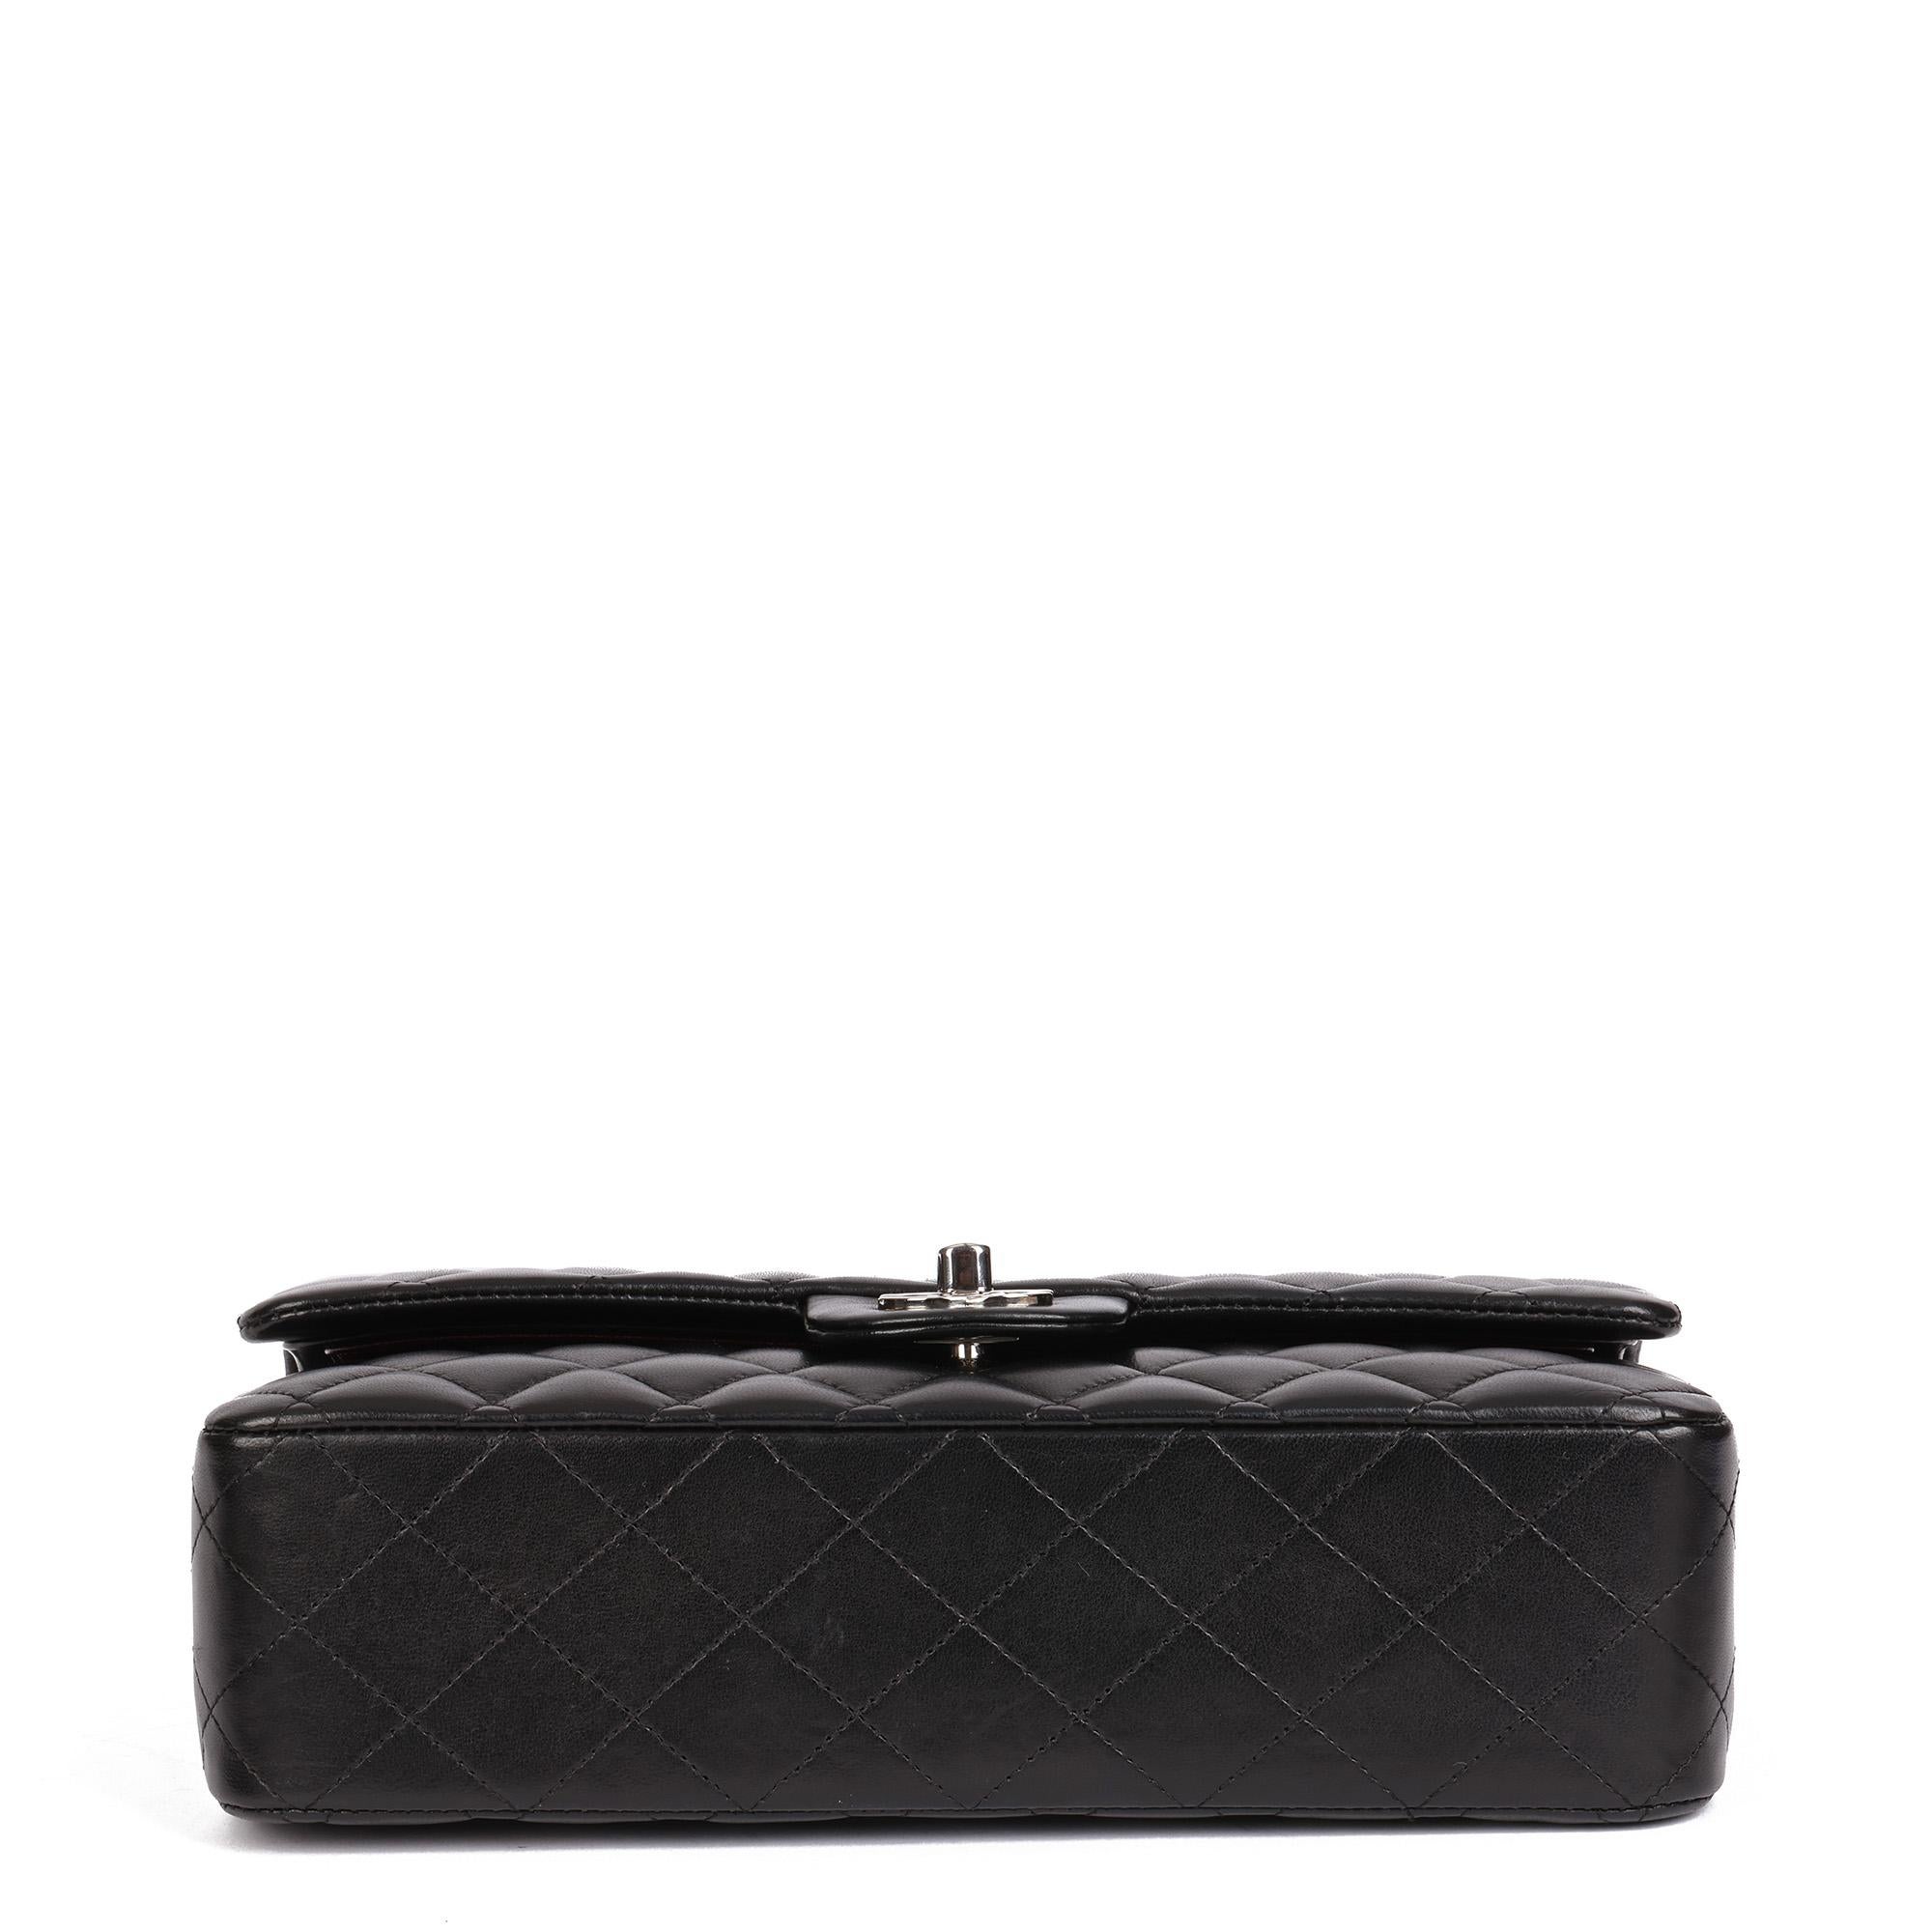 CHANEL Black Quilted Lambskin Medium Classic Double Flap Bag 2